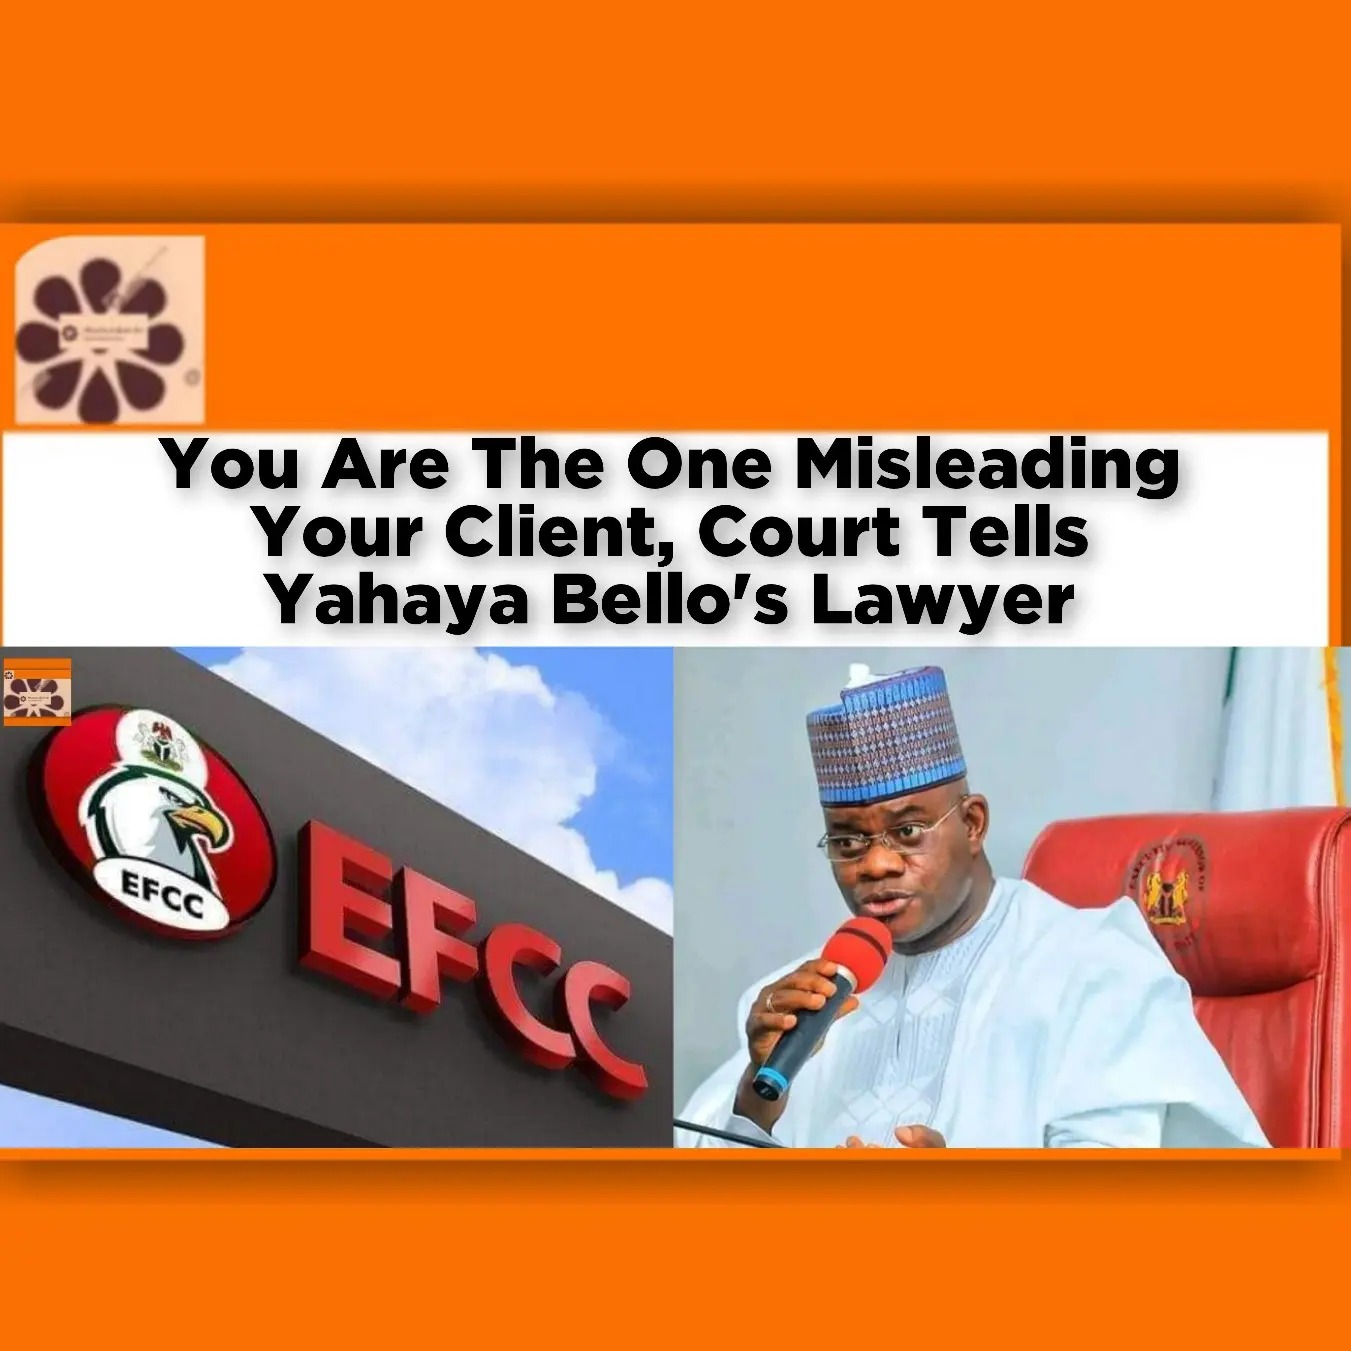 You Are The One Misleading Your Client, Court Tells Yahaya Bello's Lawyer ~ OsazuwaAkonedo #FaniKayode